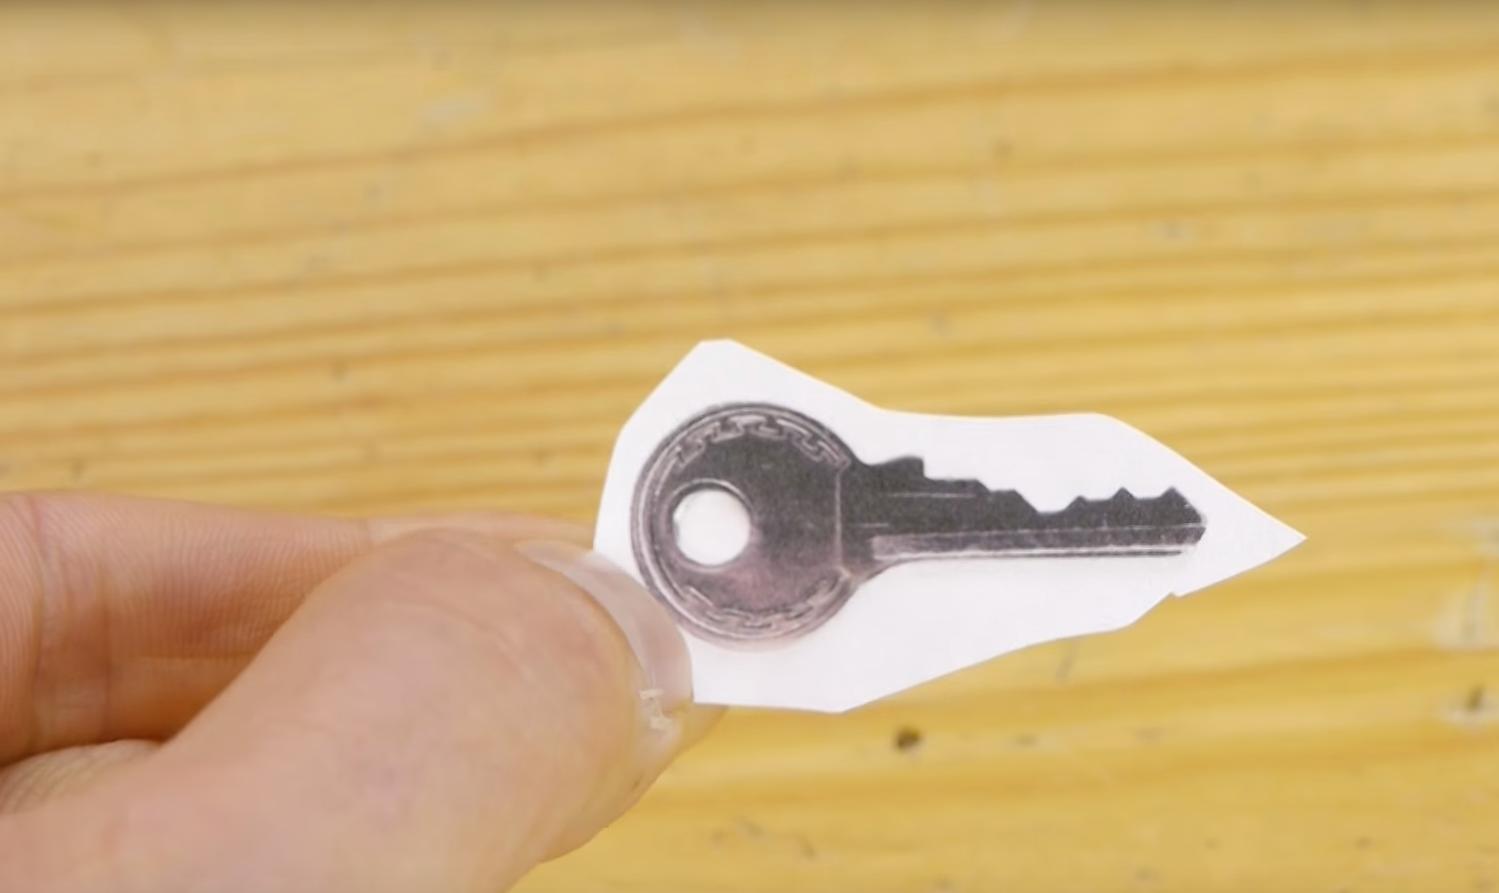 Copying a Key With a Printer and an Empty Can